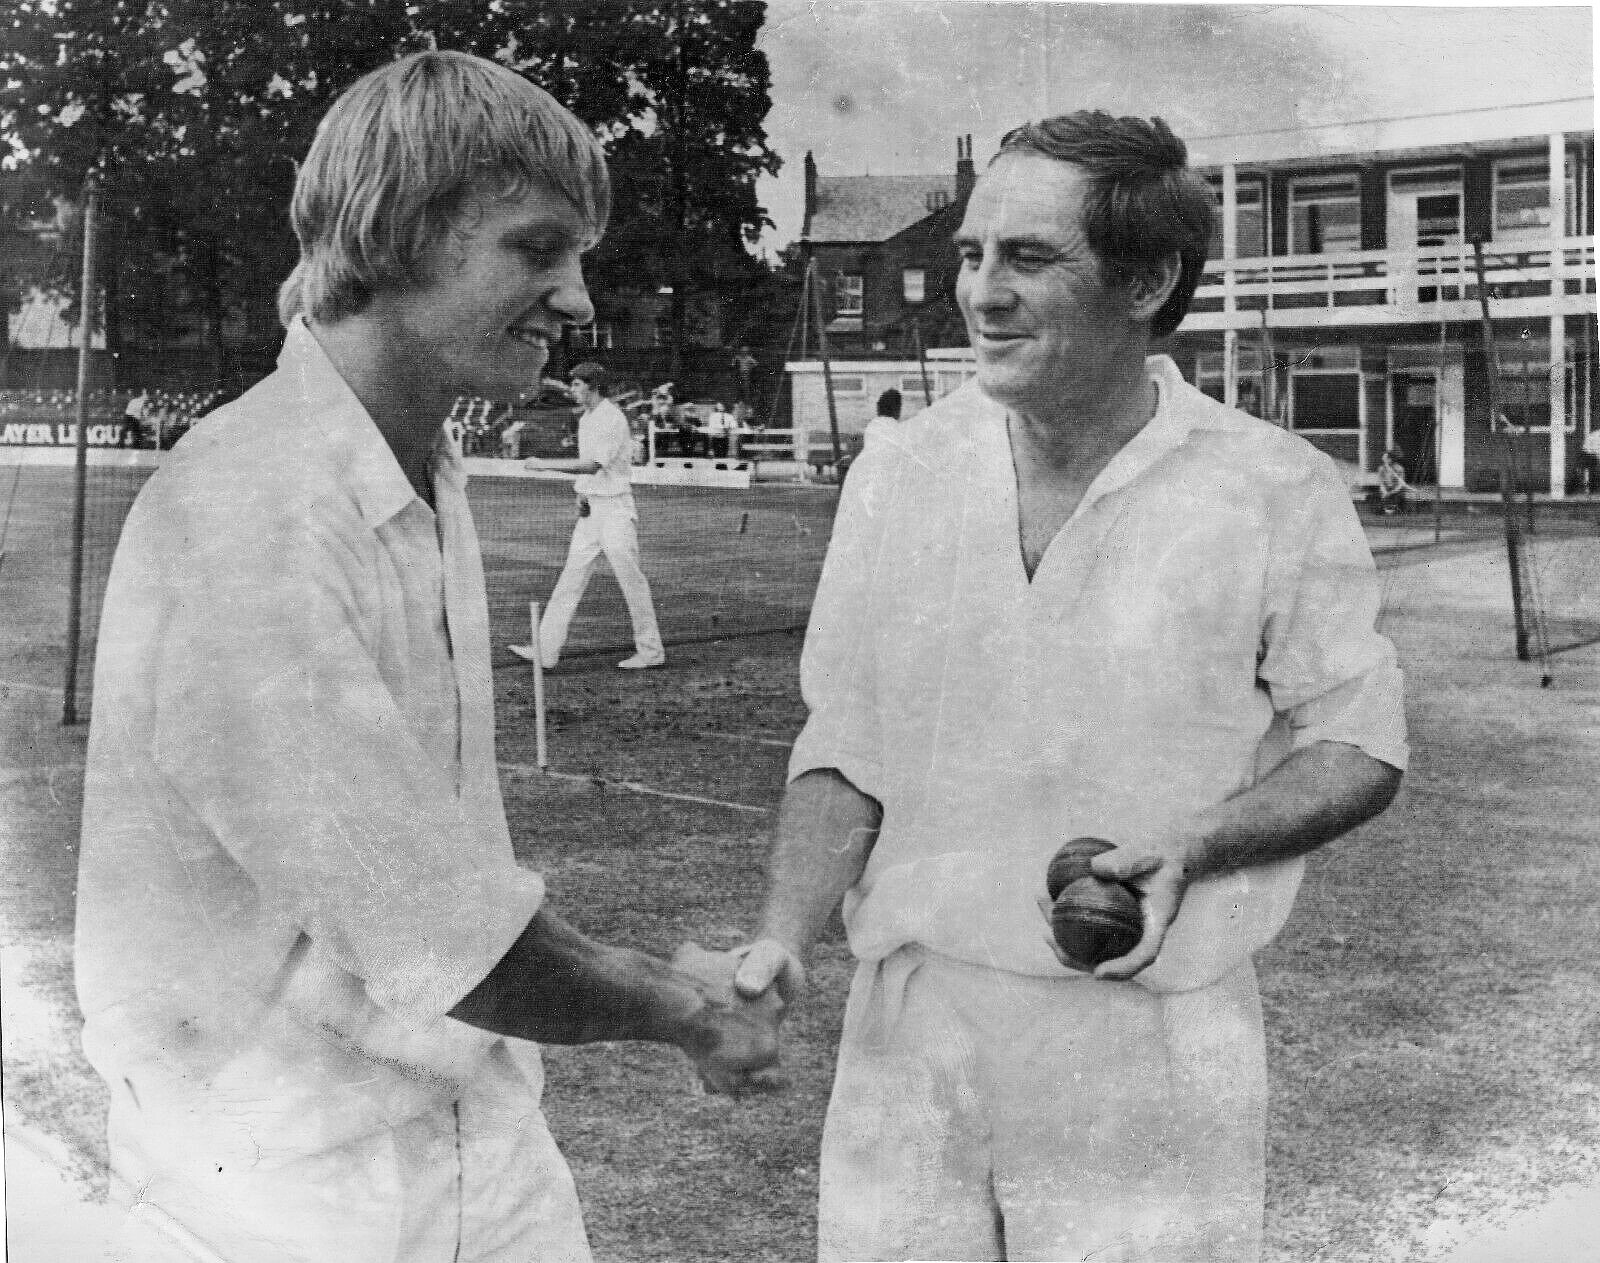 Ray Illingworth shakes hands with Frank Hayes at Leeds in July 1973. Hayes had been called into the squad for the 3rd Test v NZ at Headingley but did not play.